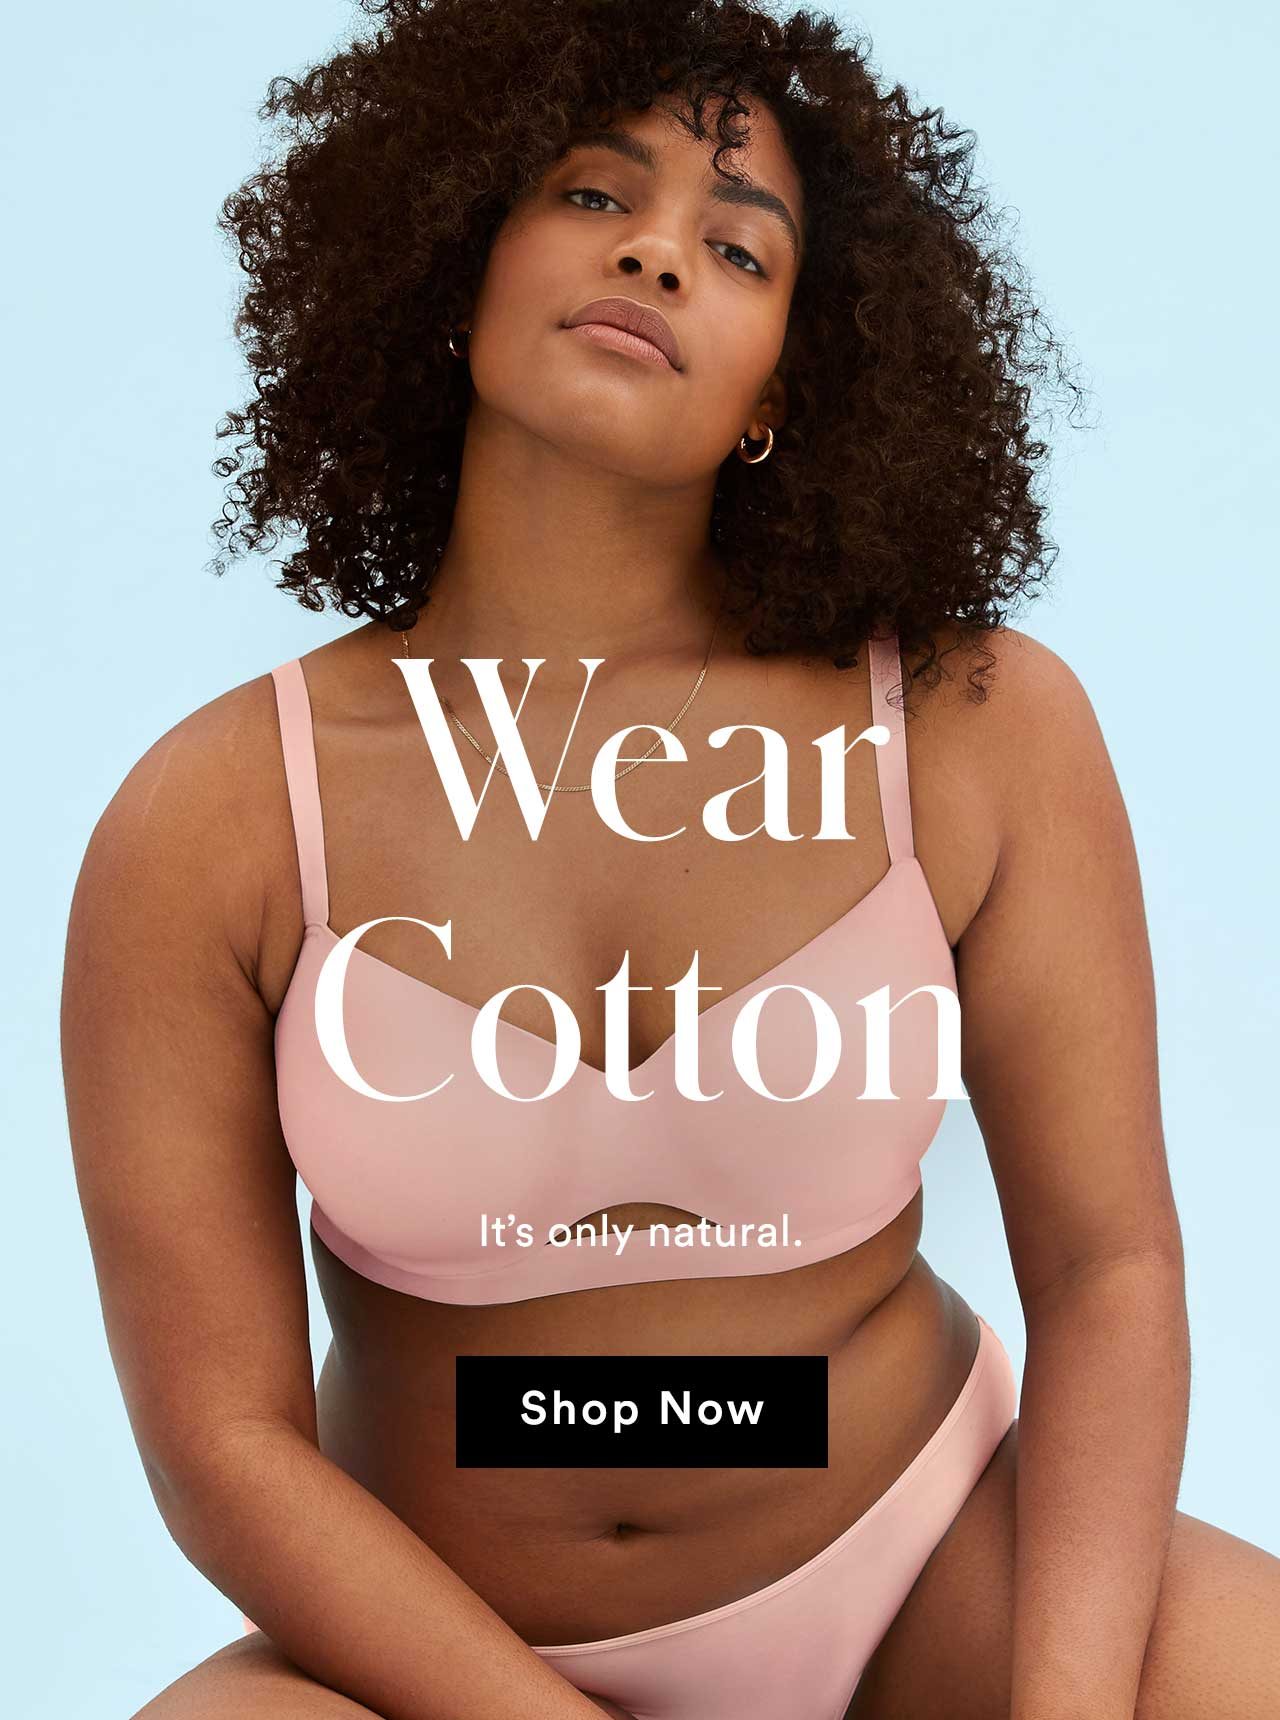 Wear Cotton, it's only natural. Shop now.